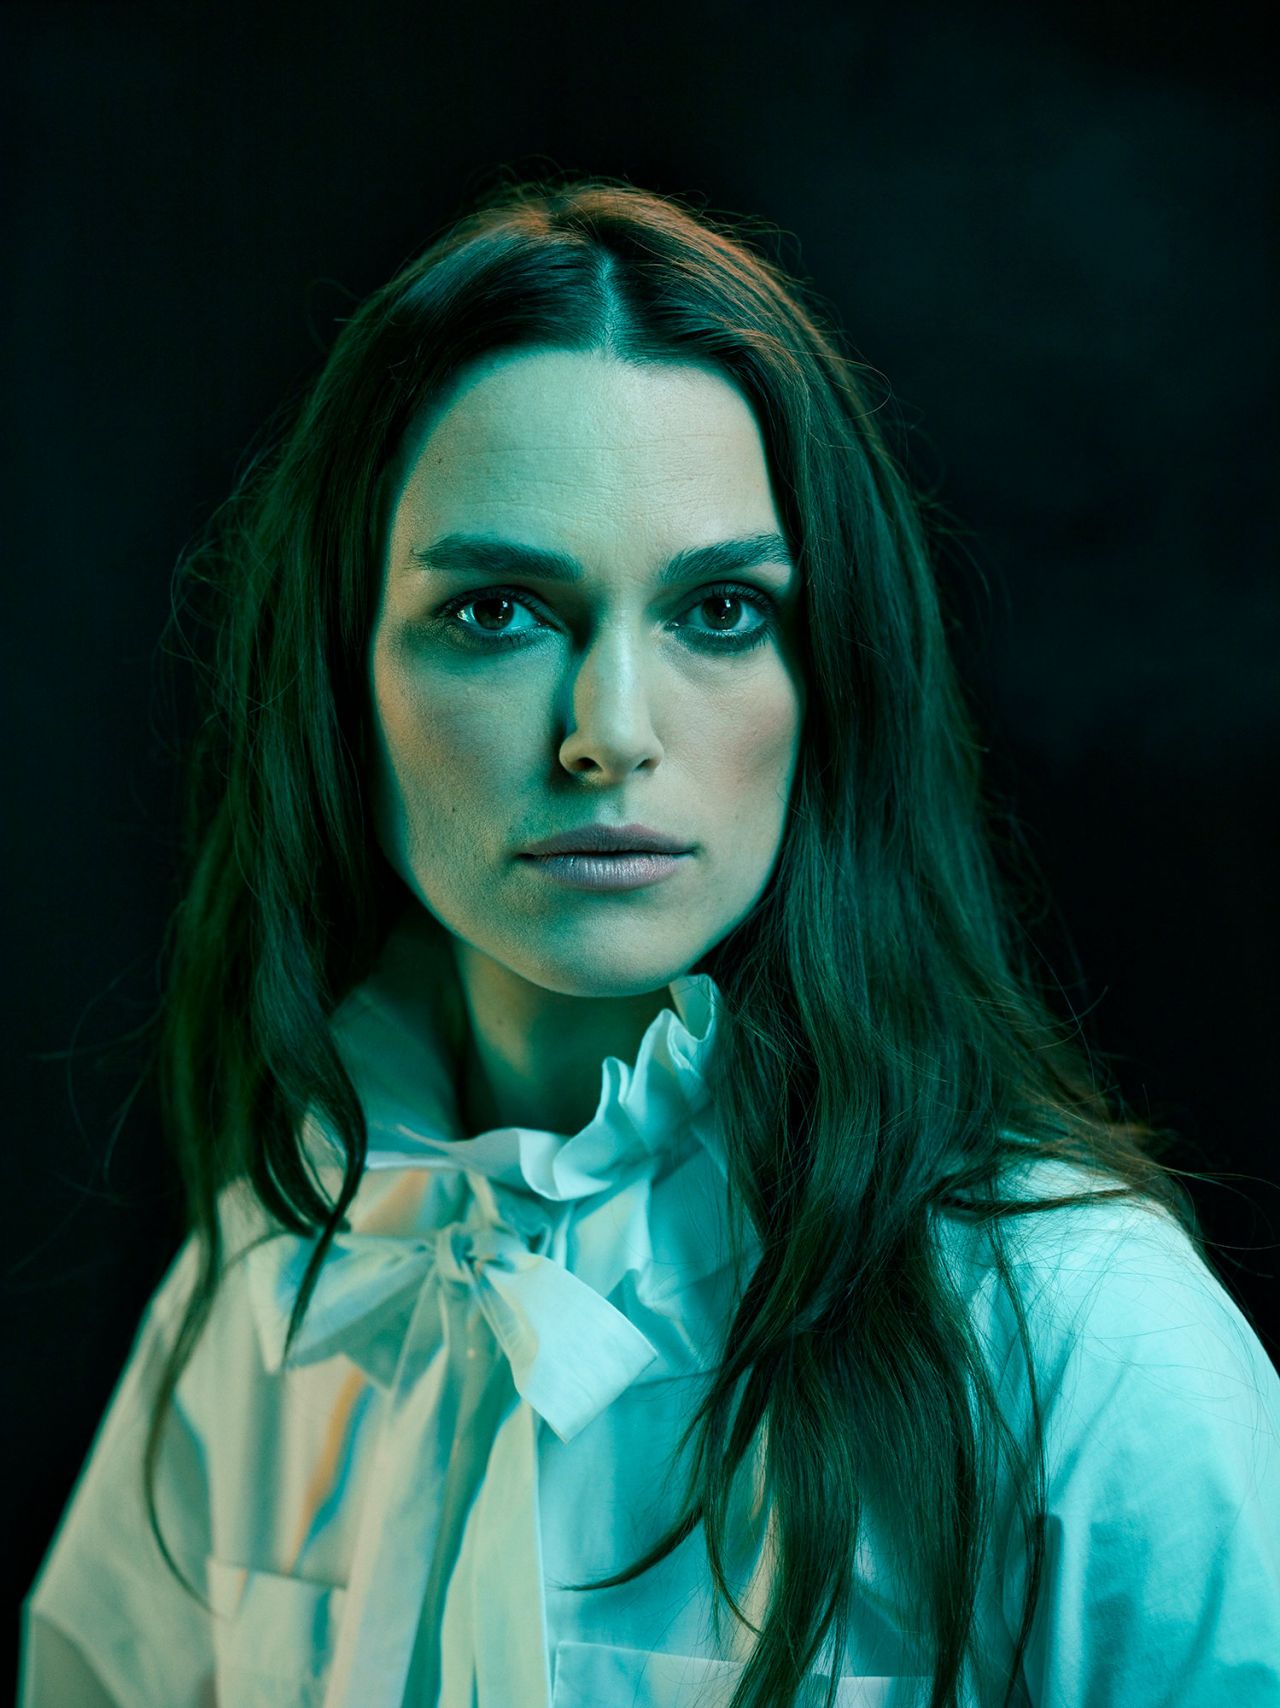 Pretty Keira Knightley For Variety Wallpapers